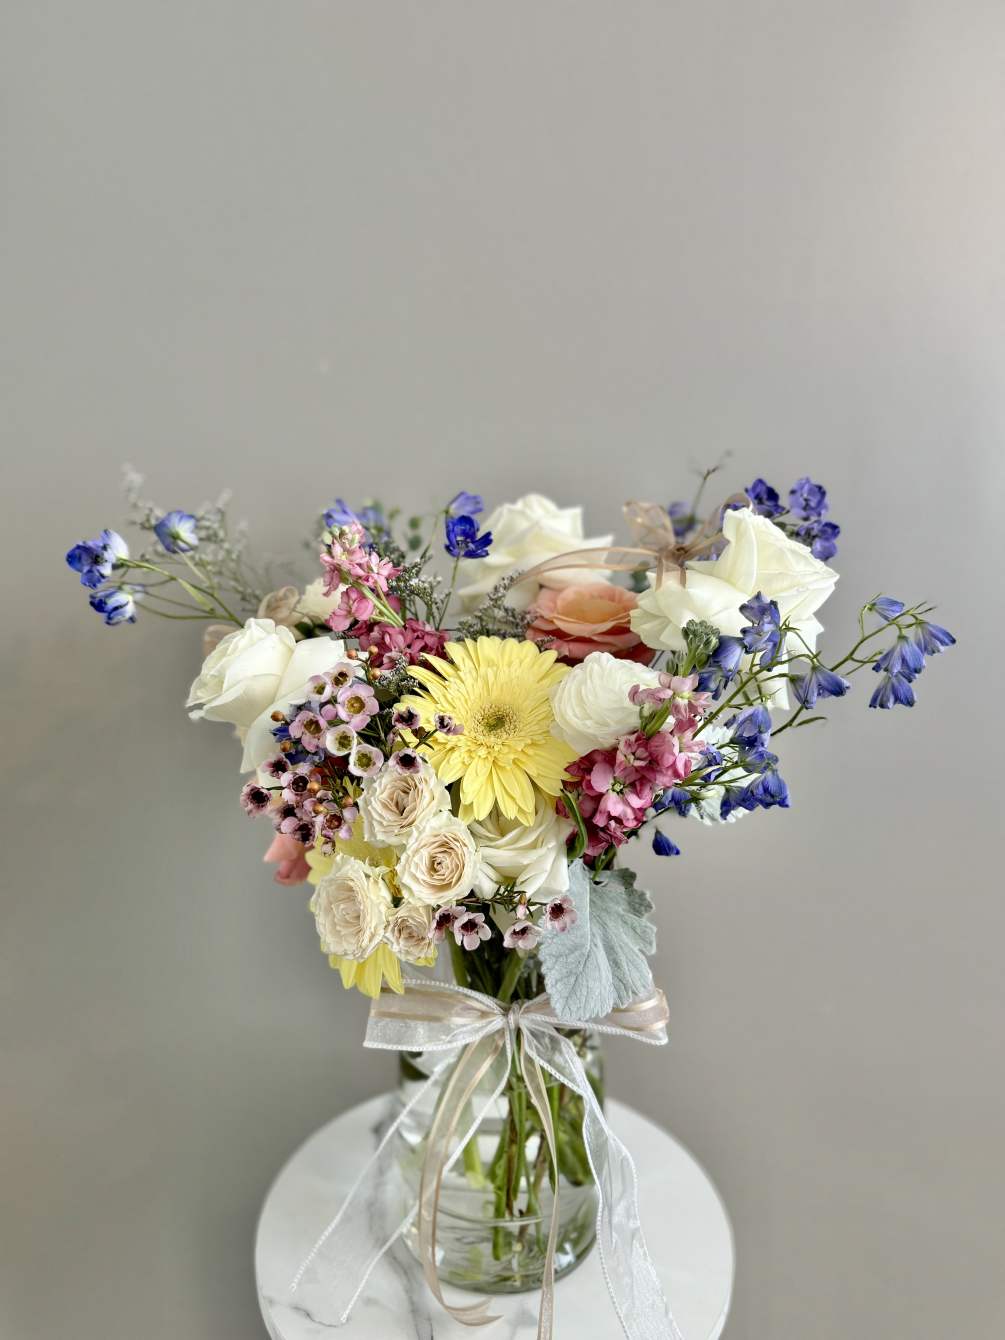 Flowers, Color, and Style chosen by the Florist. These arrangements are a